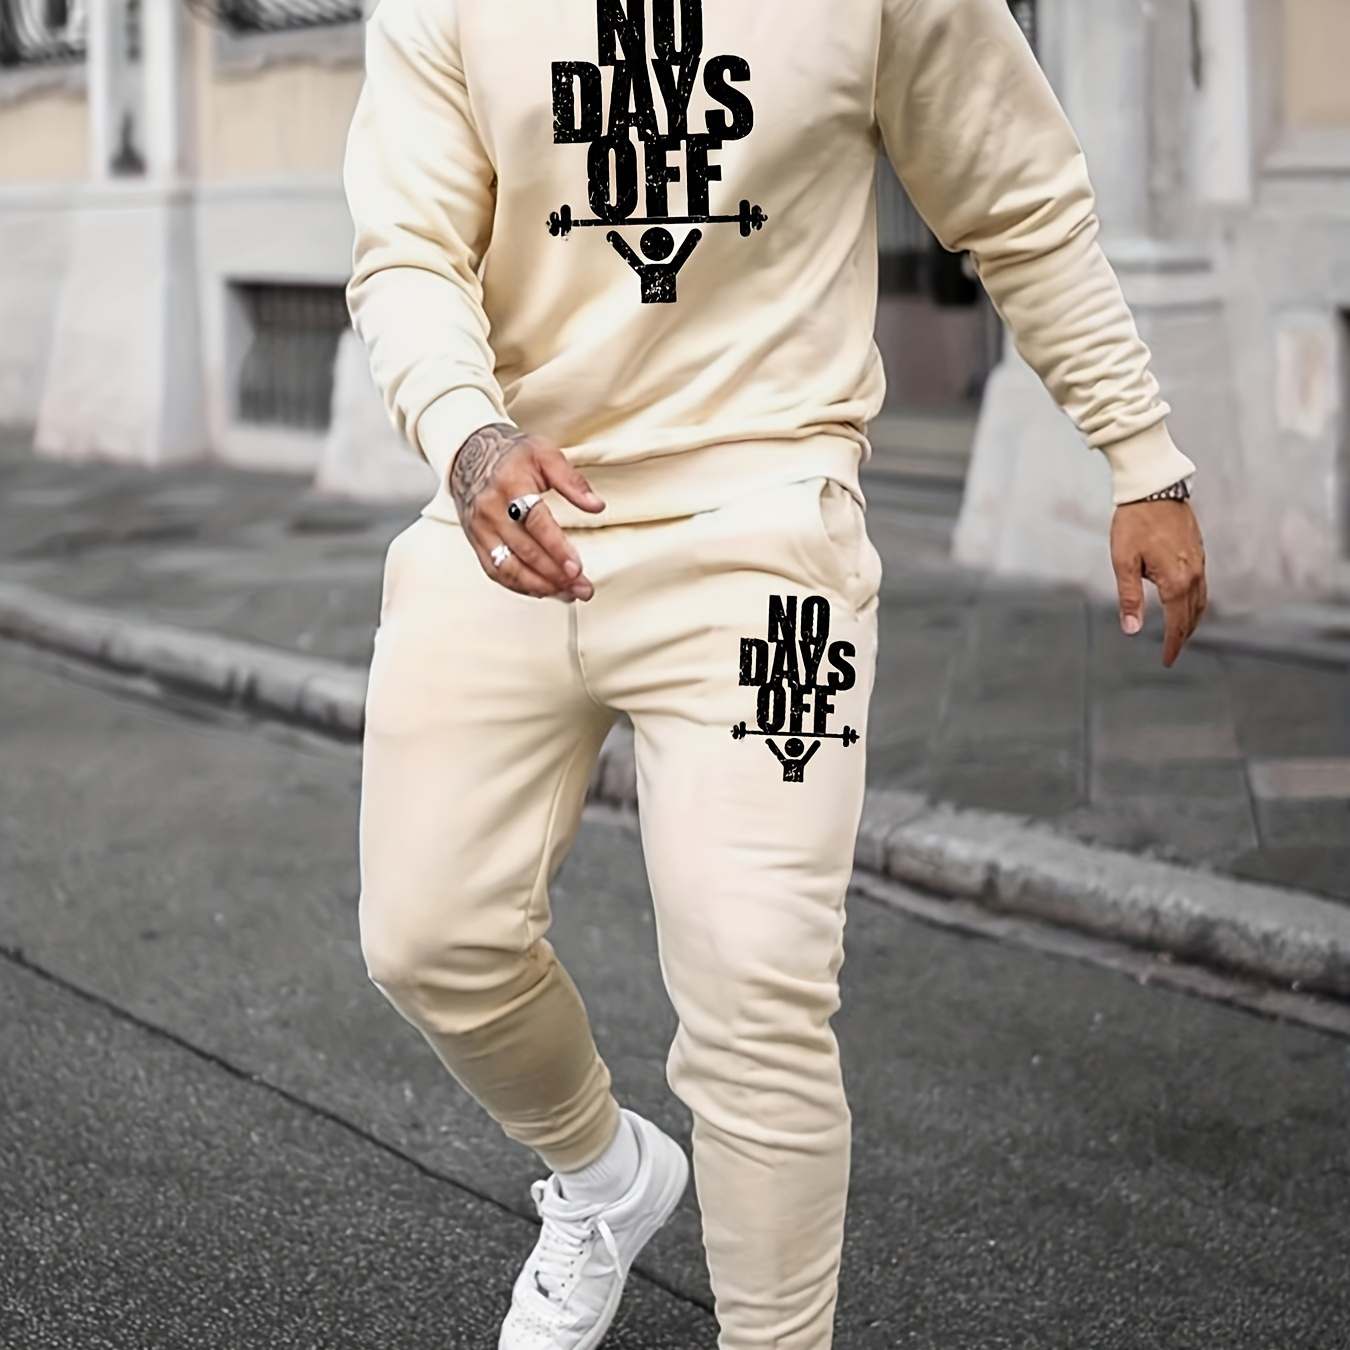 

No Days Off Print, Men's 2pcs Outfits, Casual Crew Neck Long Sleeve Pullover Sweatshirt And Drawstring Sweatpants Joggers Set For Spring Fall, Men's Clothing